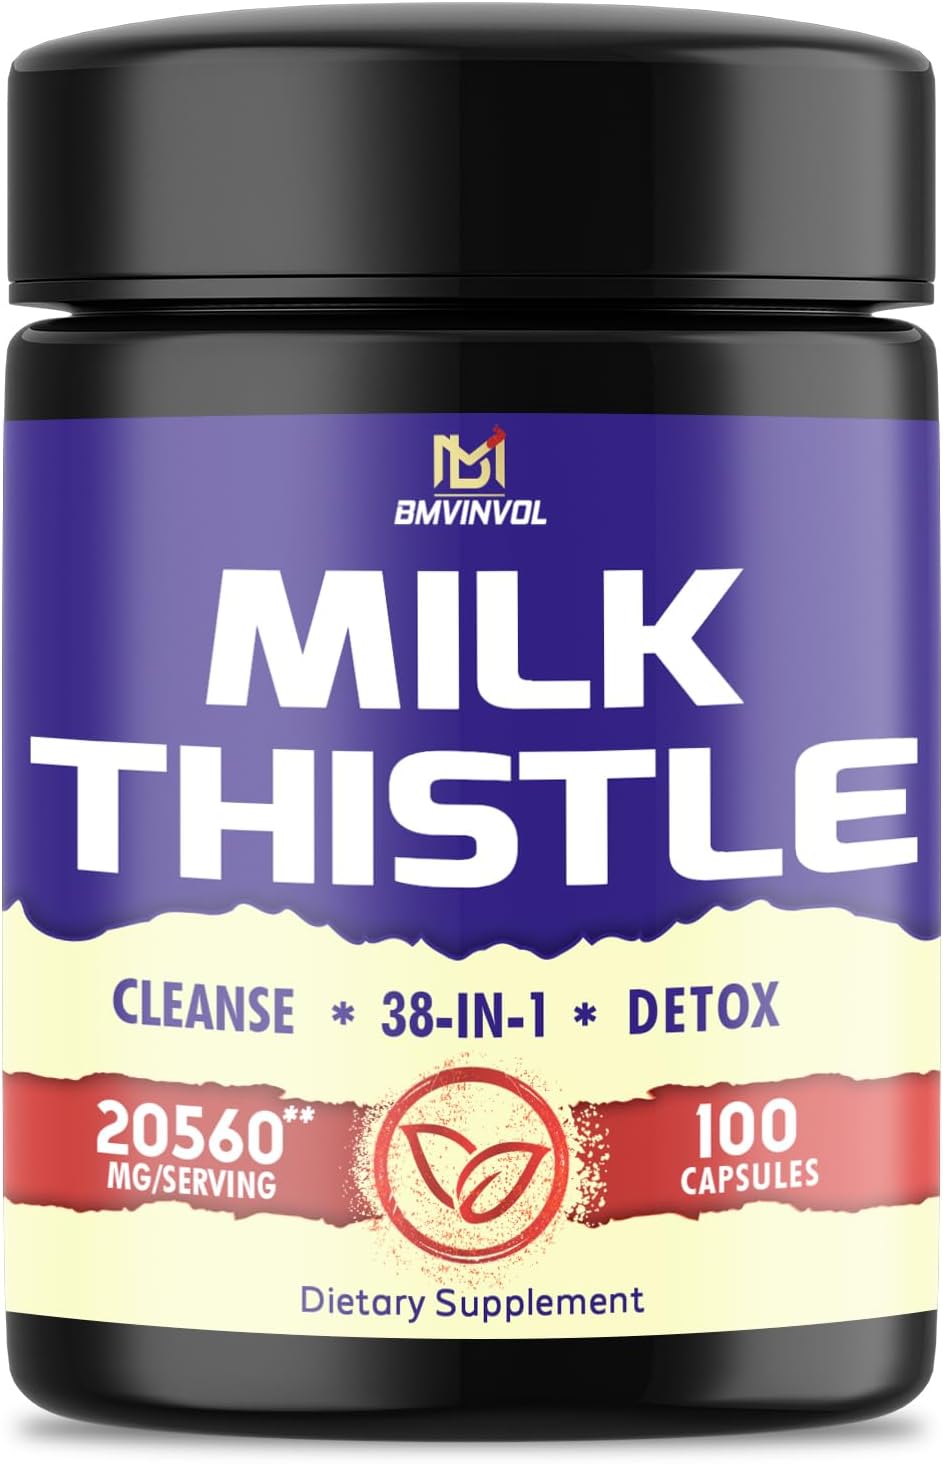 BMVINVOL 100 Capsules - Milk Thistle 30:1 Extract Capsules - 20560mg Strength with Apple Cider Vinegar & More - 38in1 Milk Thistle Supplement Supports Healthy Liver Function